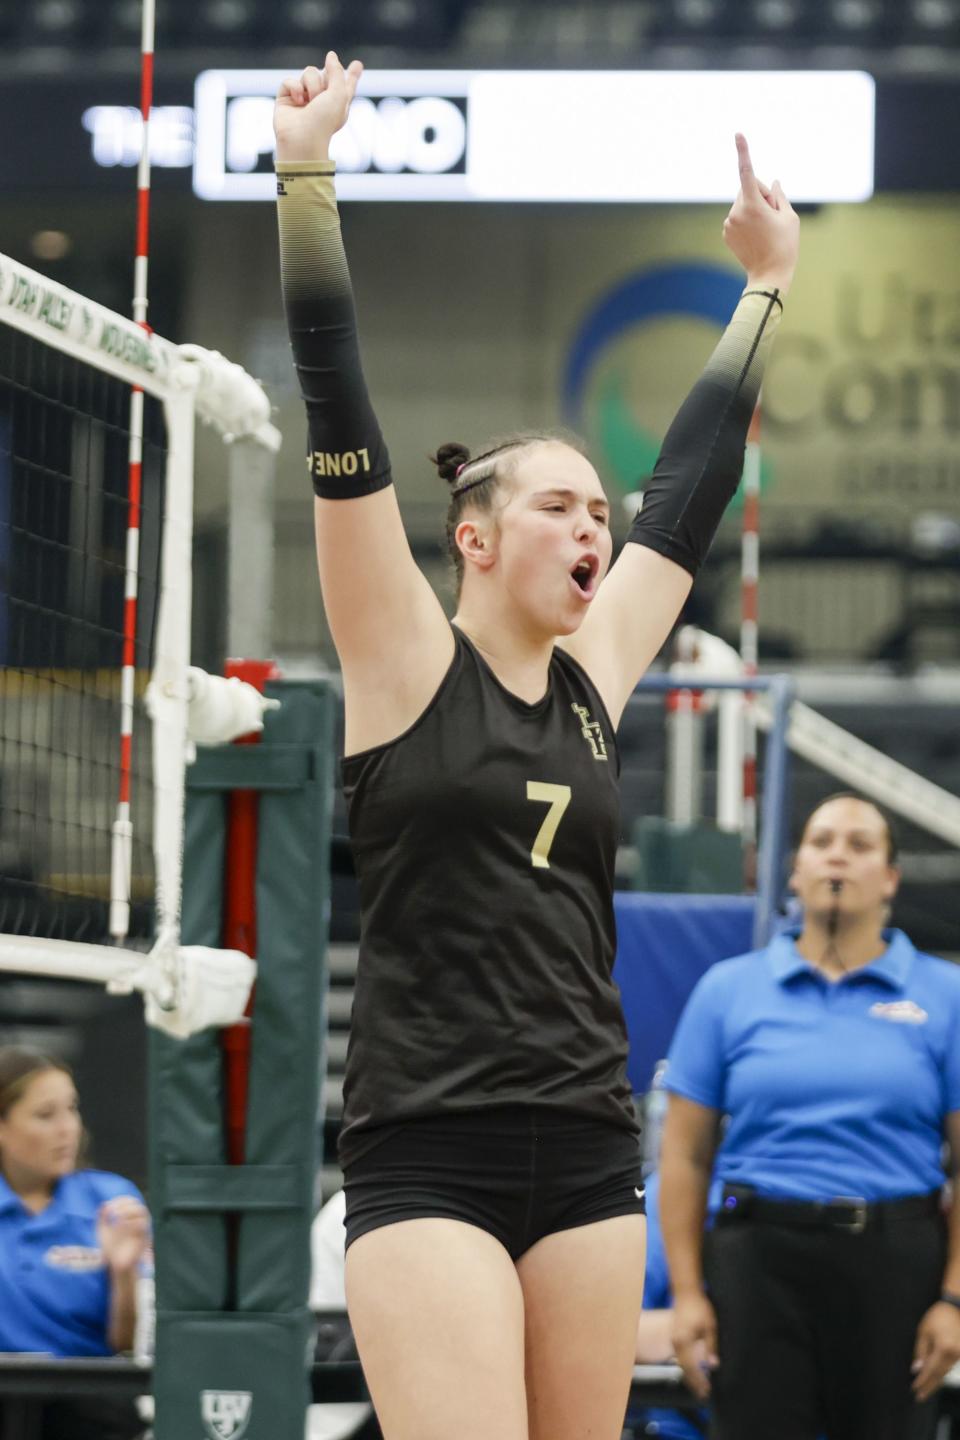 The Lone Peak Knights’ Zoey Burgess celebrates after scoring a point against the Mountain Ridge Sentinels in the 6A finals in Orem on Saturday, Nov. 5, 2022. The Lone Peak Knights won 3-1 in sets. | Ben B. Braun, Deseret News